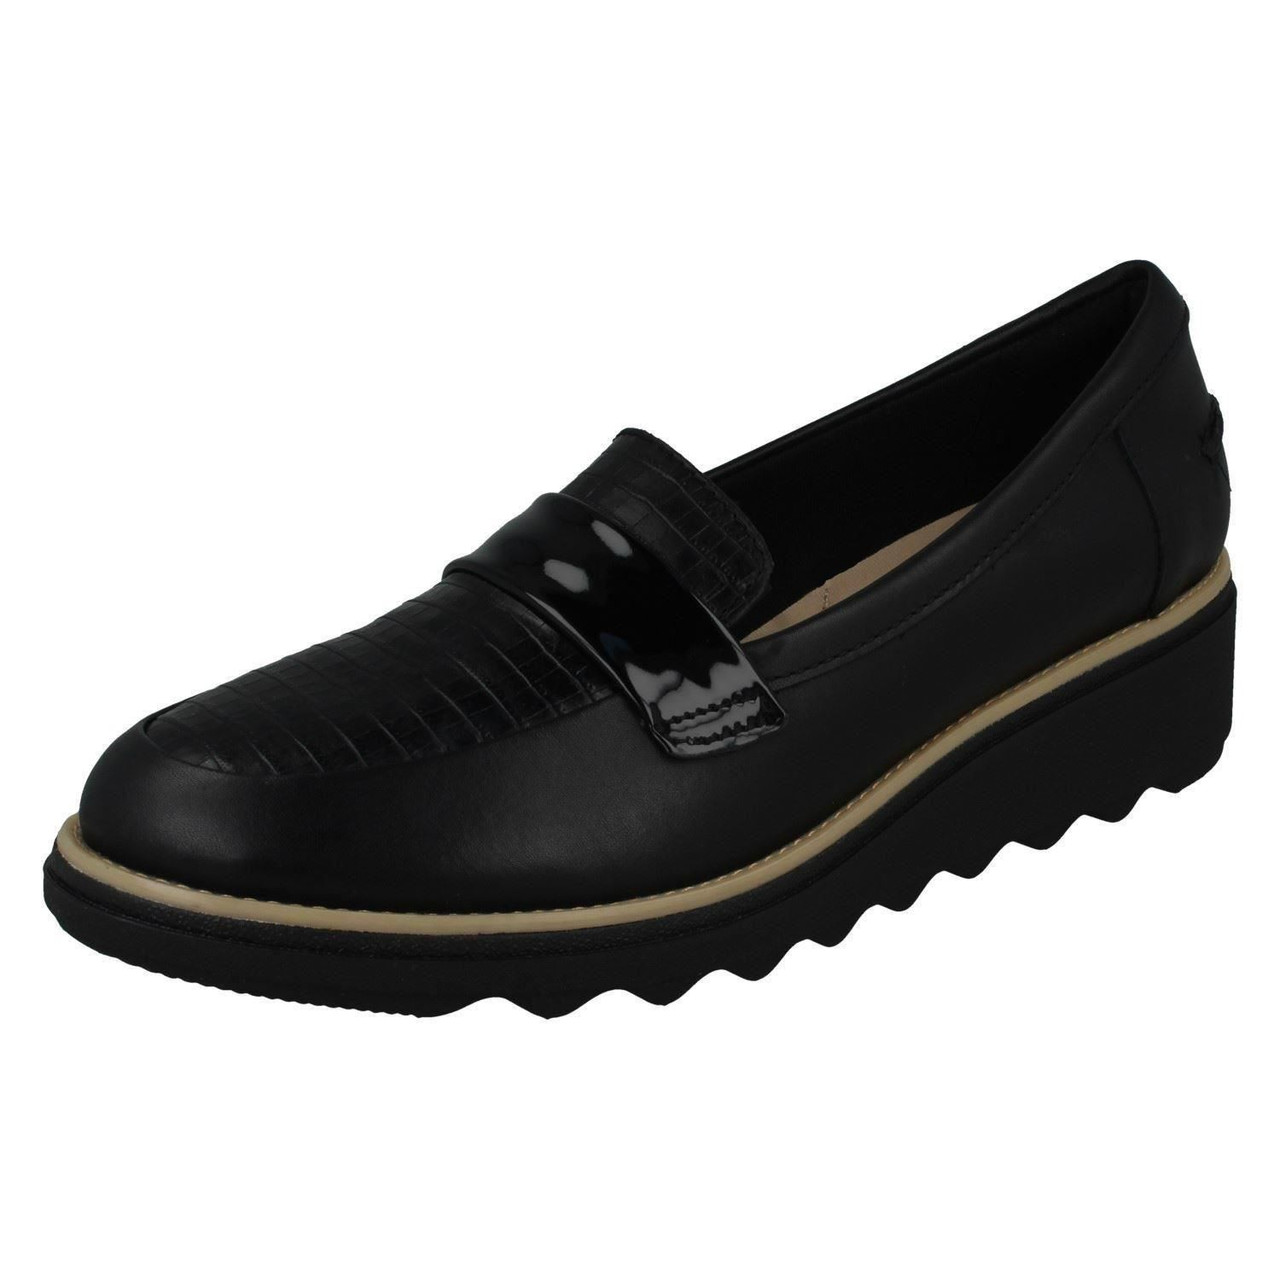 sharon gracie loafers clarks